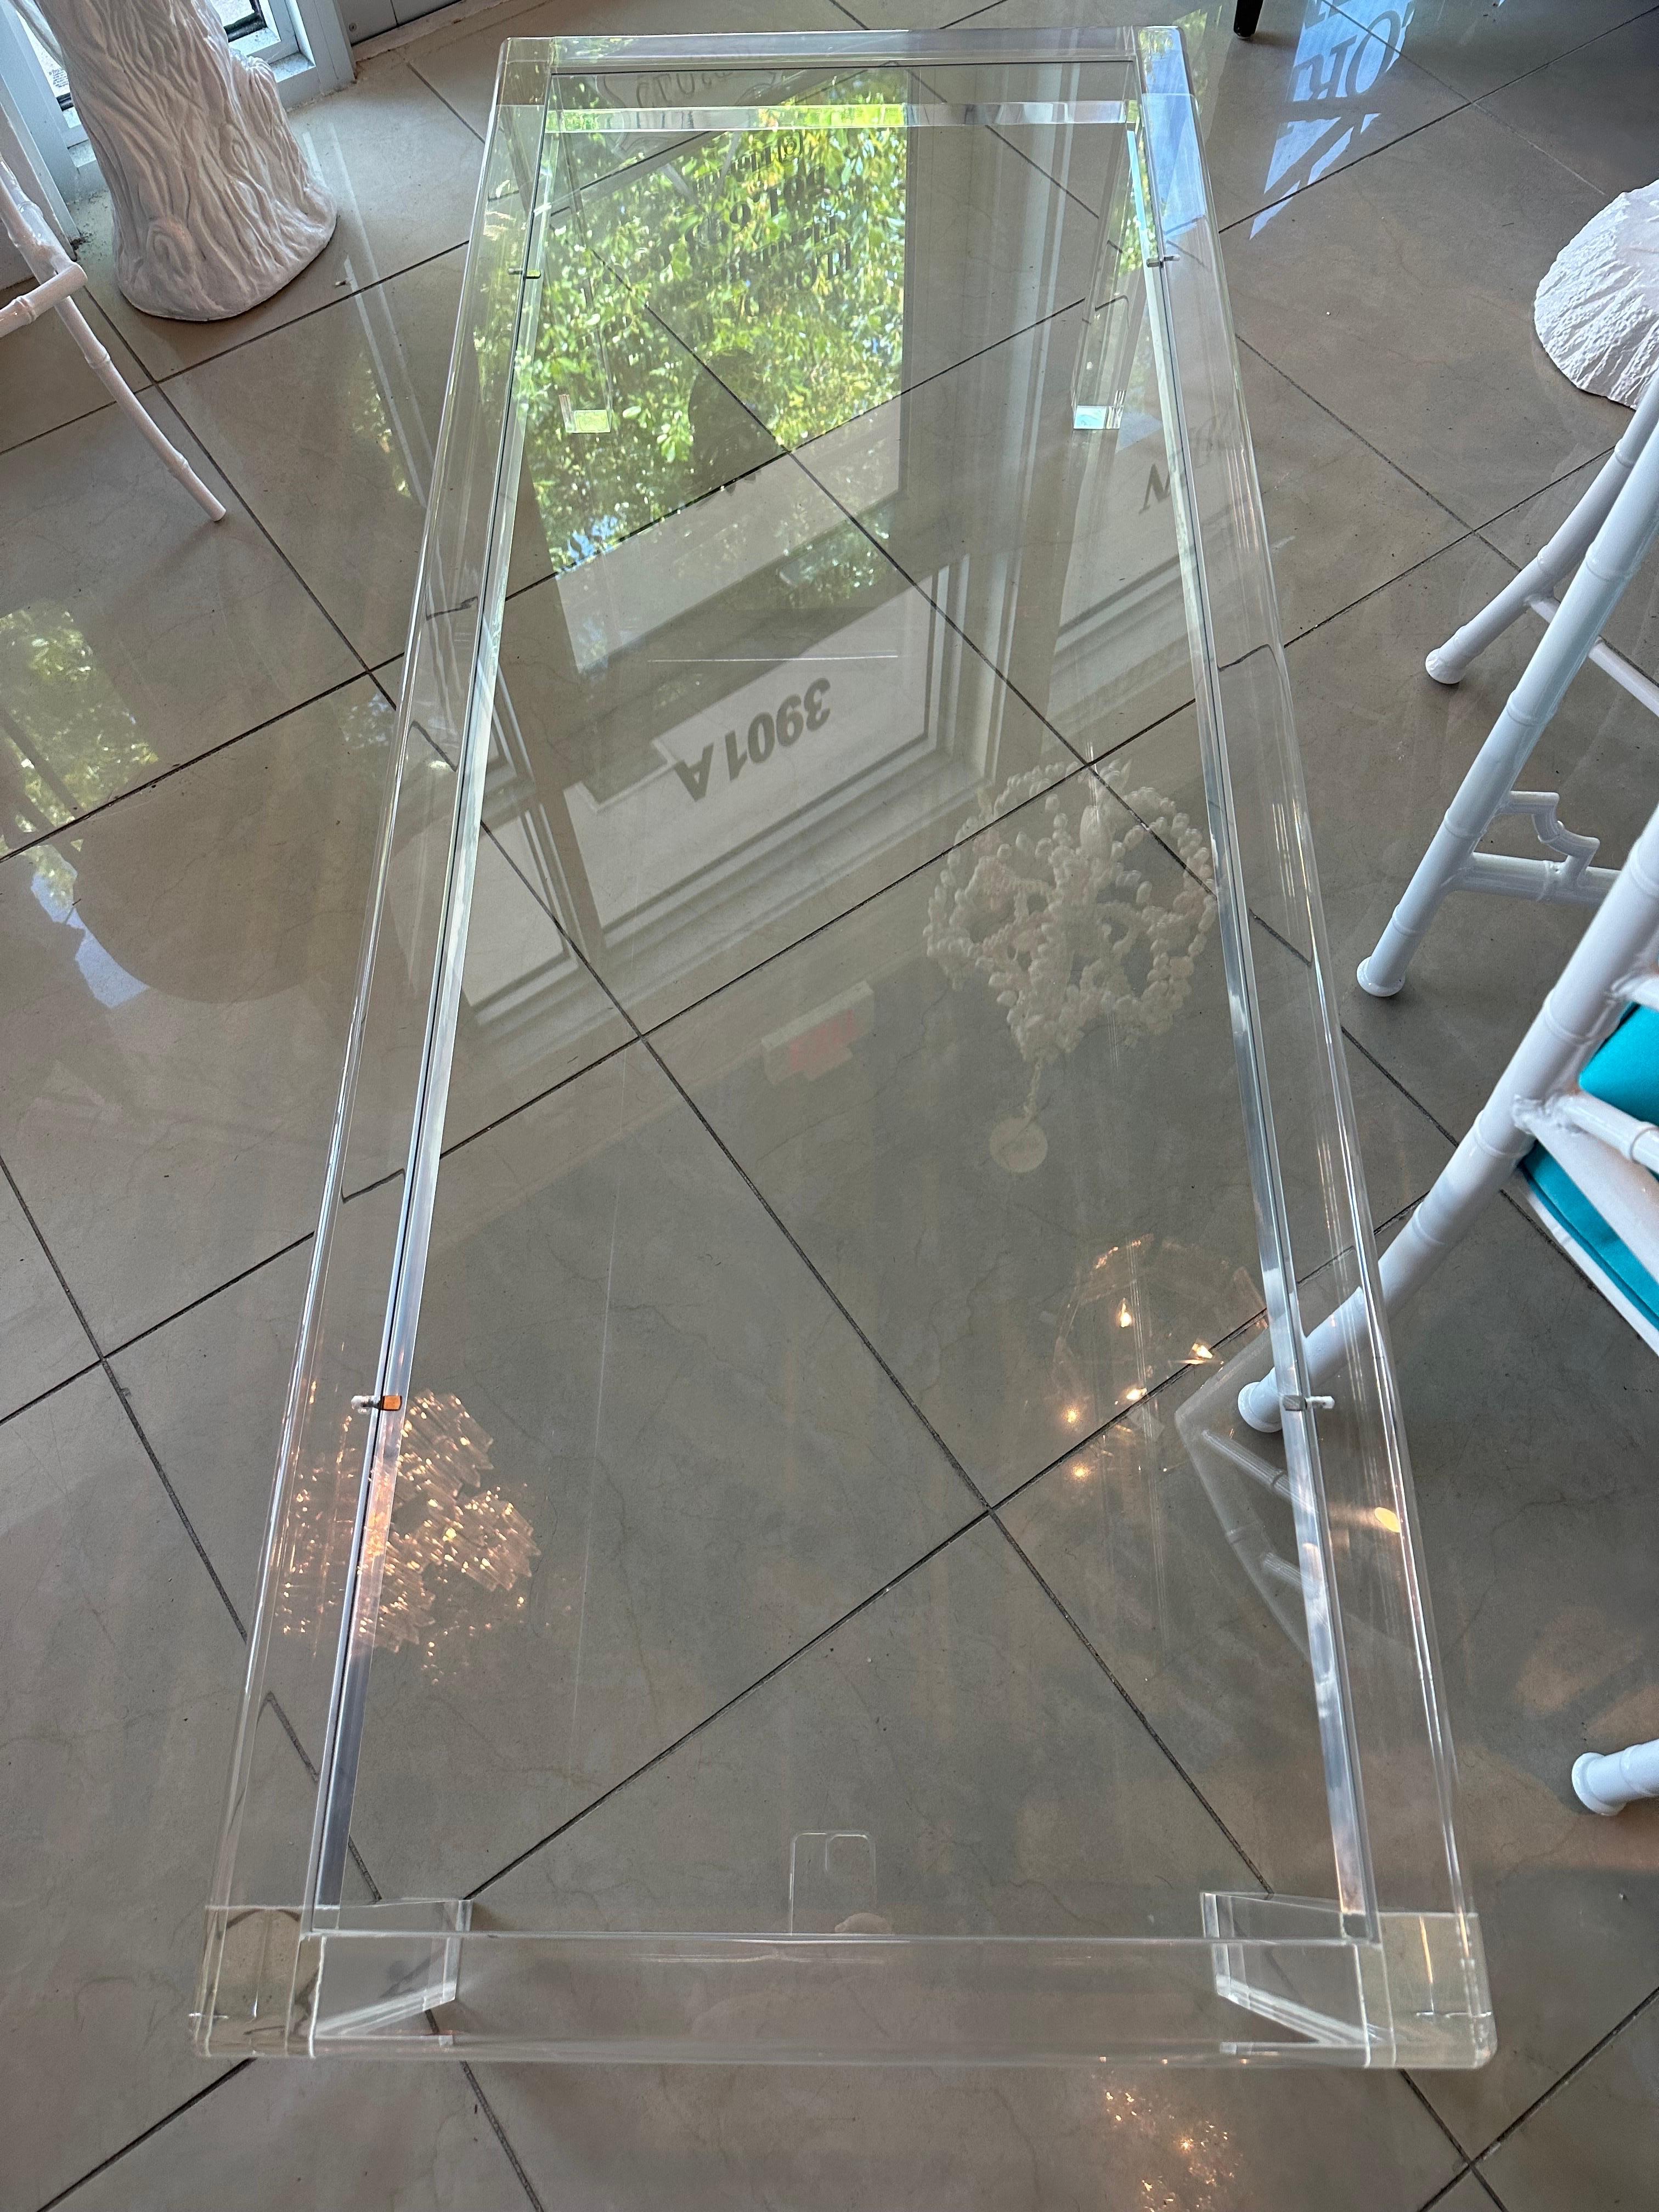 Vintage lucite coffee cocktail table with inset glass for a clean modern, sleek look. The glass top is new. The Lucite has been professionally polished. Dimensions: 15 H x 60 L x 24 D.